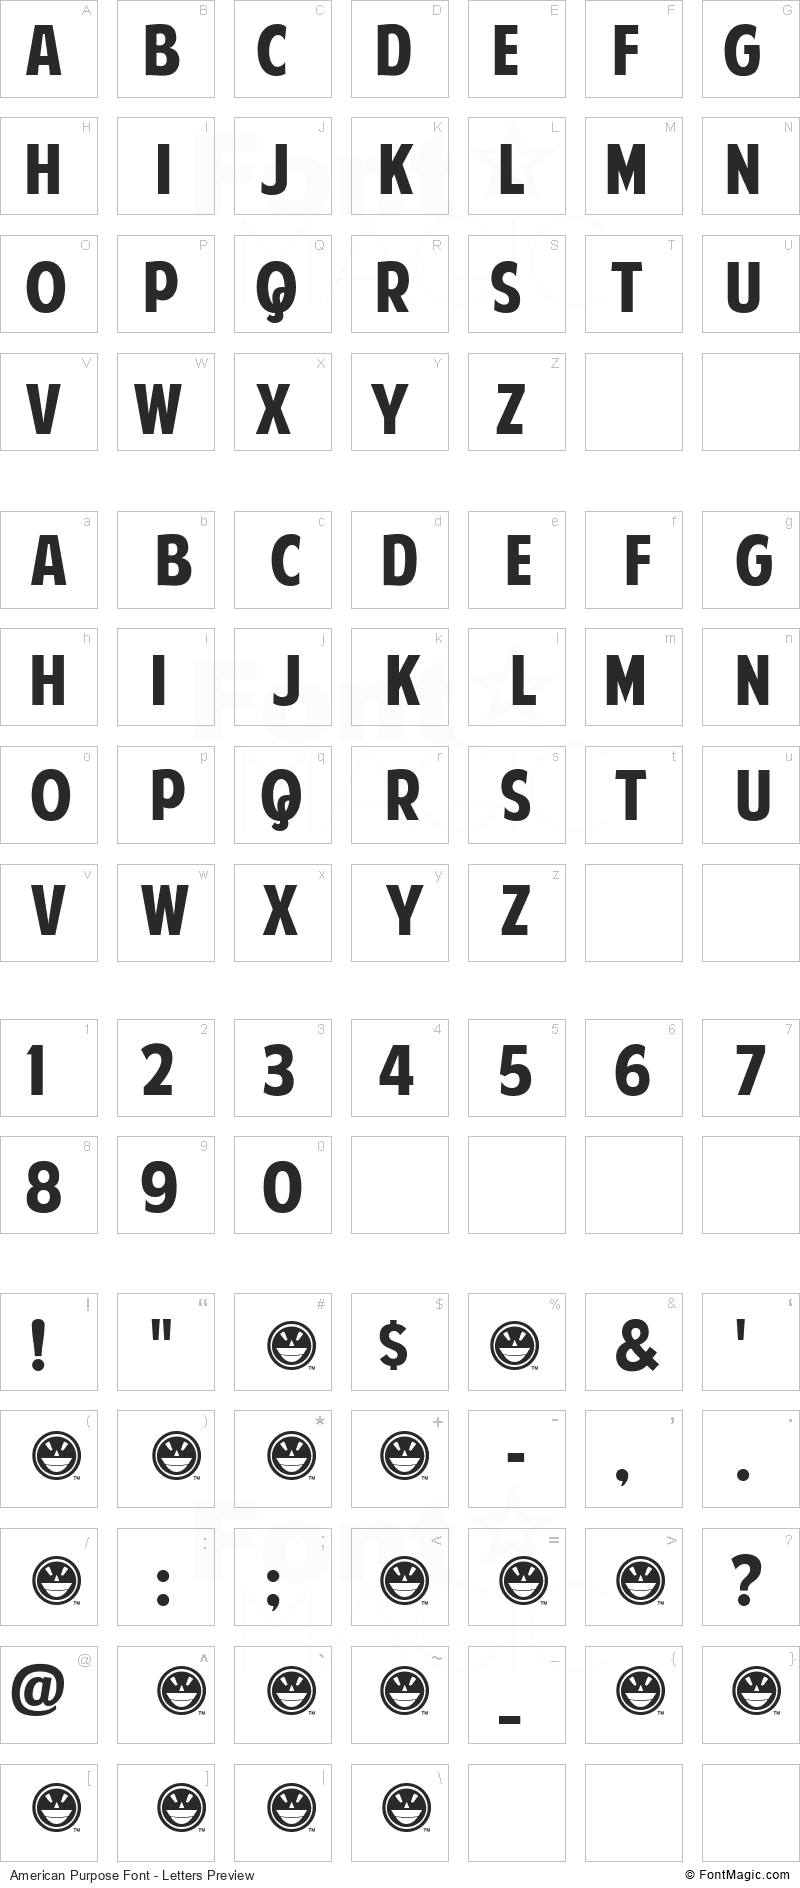 American Purpose Font - All Latters Preview Chart